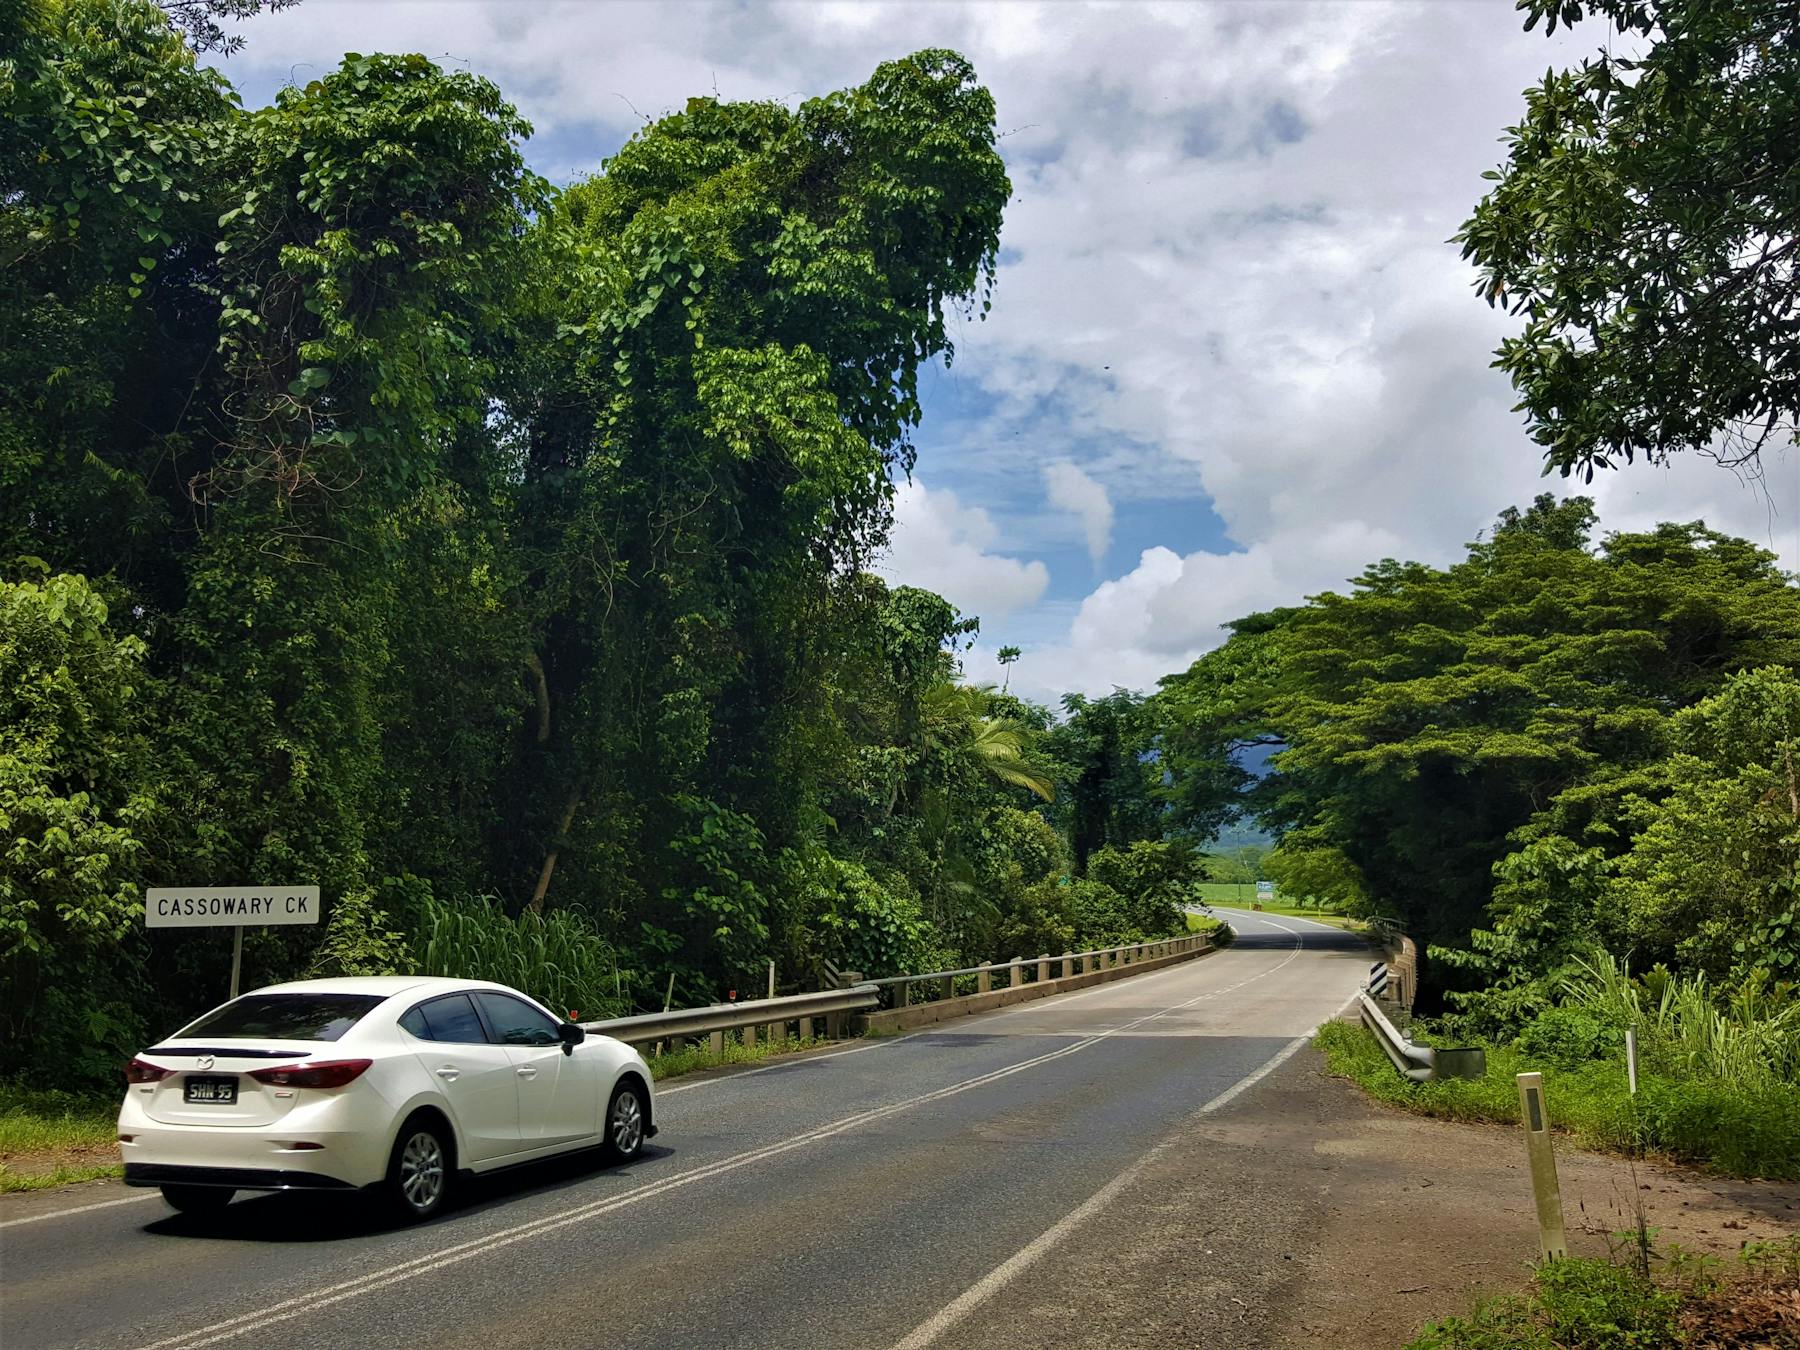 A view of a white car about to cross Cassowary Creek near the town of Mossman.